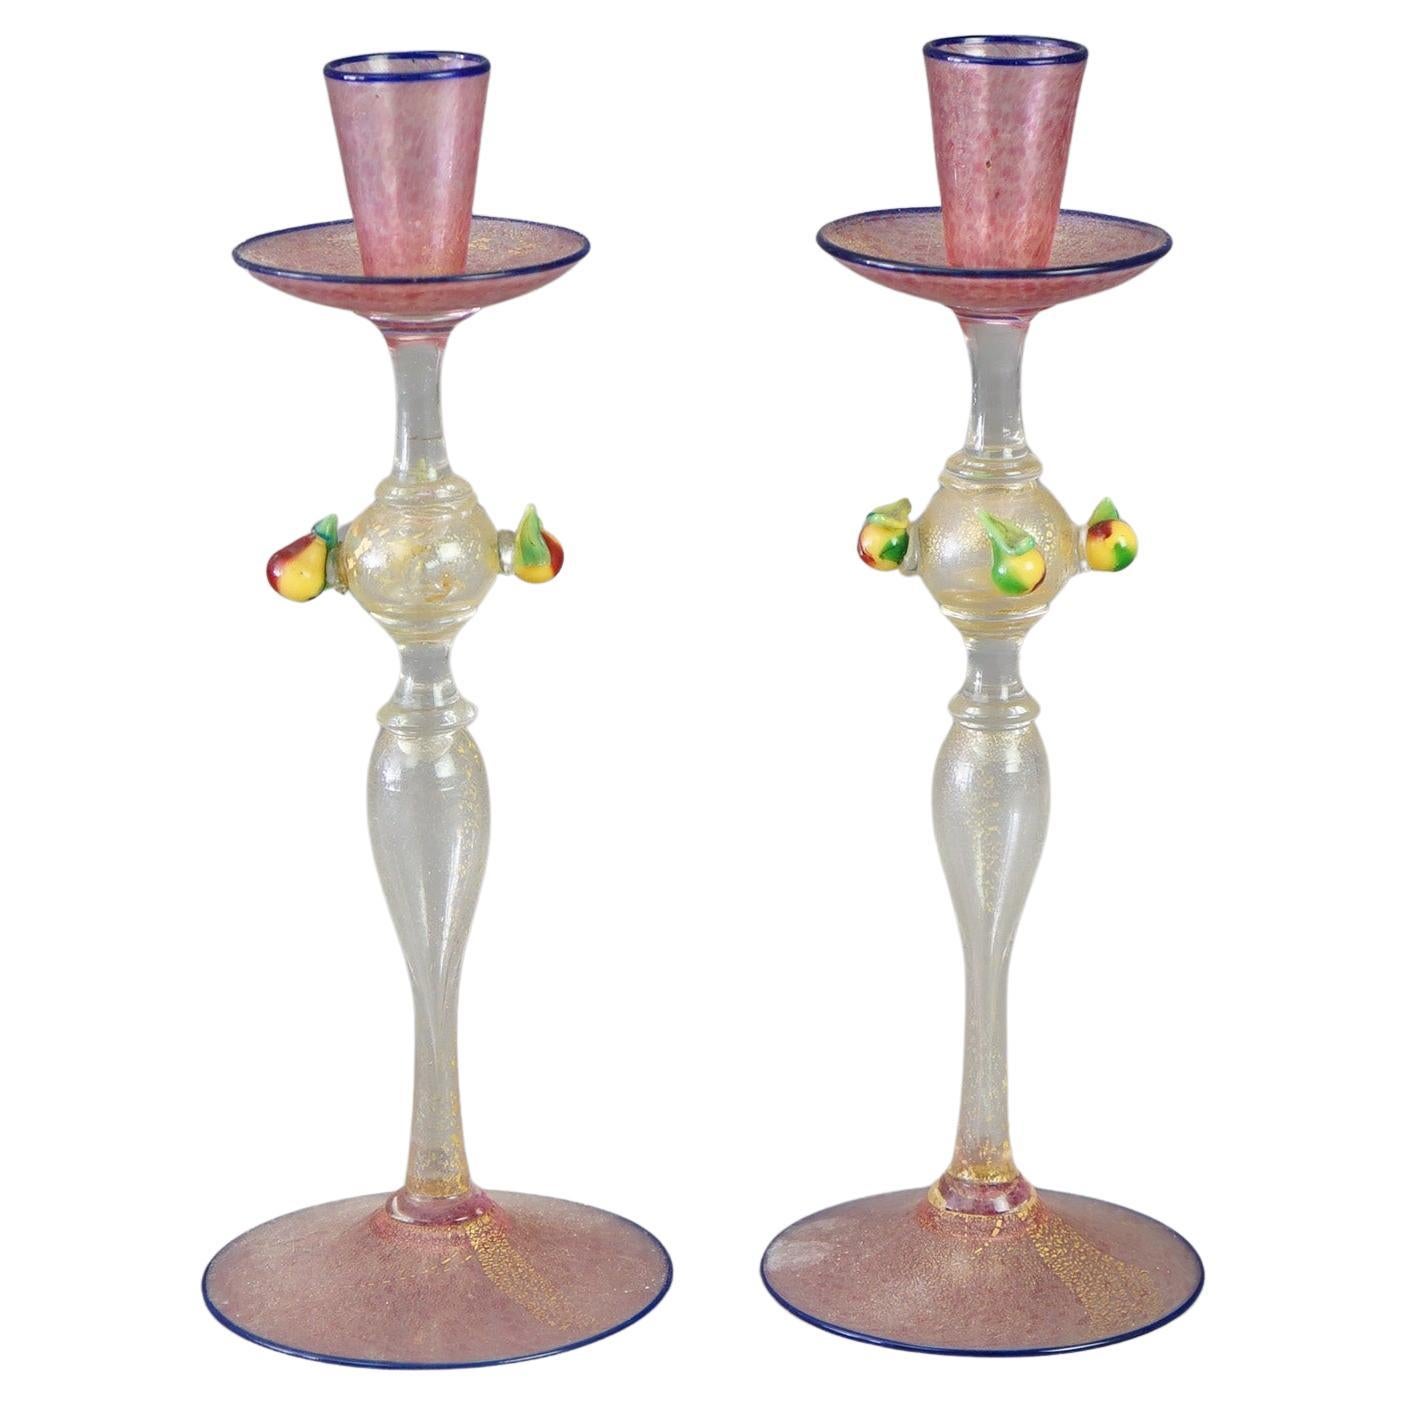 Antique Pair of Venetian Murano Art Glass Candlesticks with Pears Circa 1920